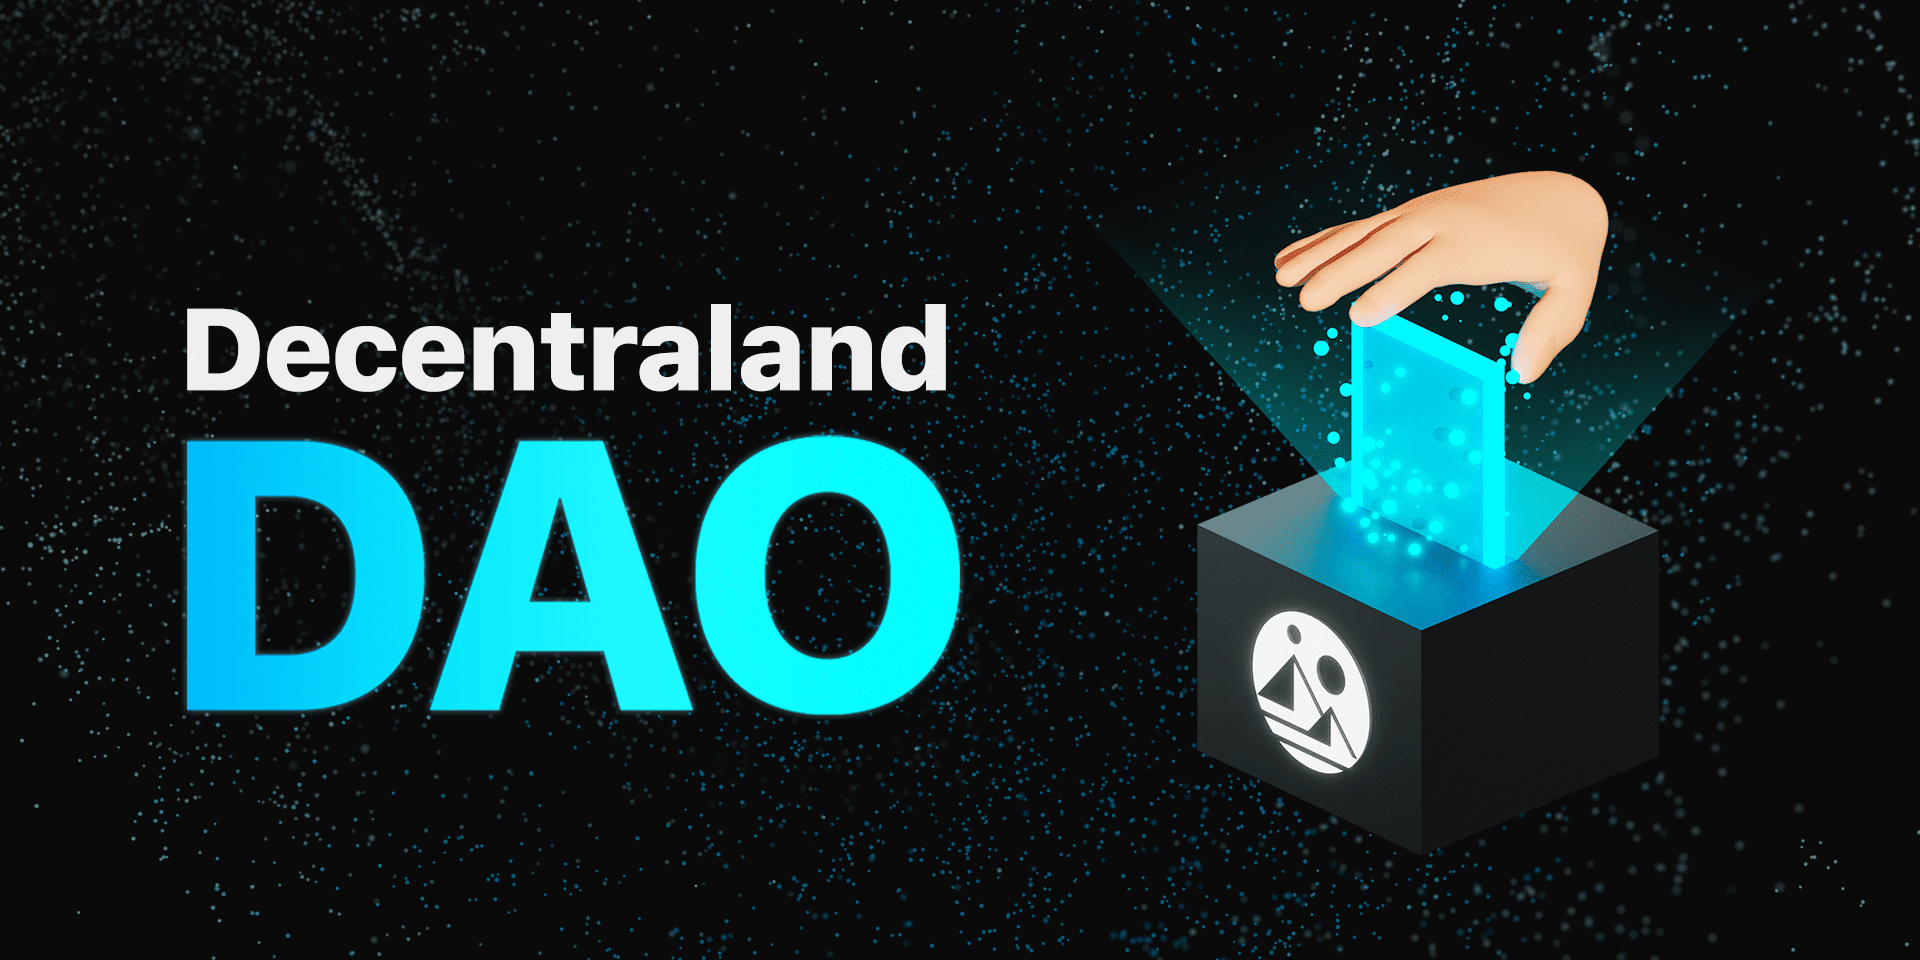 The Decentraland DAO involves hands pushing energon cubes into voting boxes.